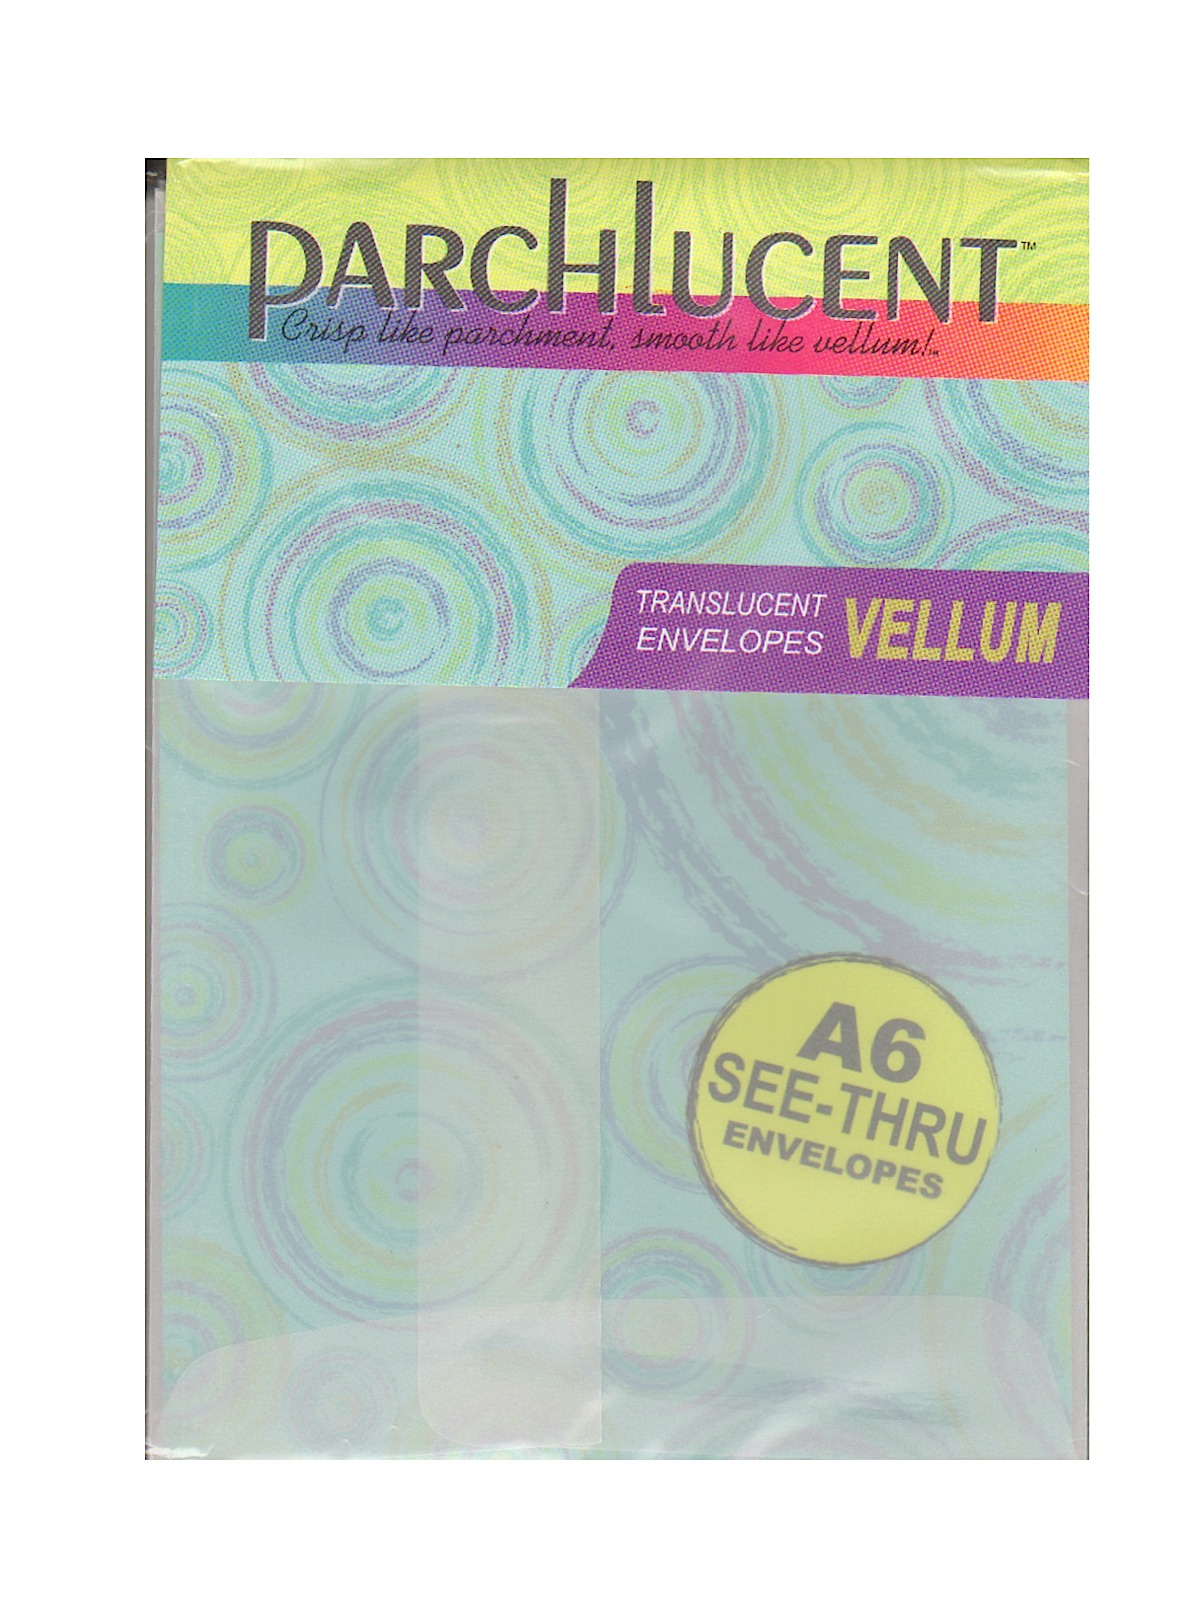 Parchlucent Envelopes 30 Lb. A6 4 3 4 In. X 6 1 2 In. Pack Of 25